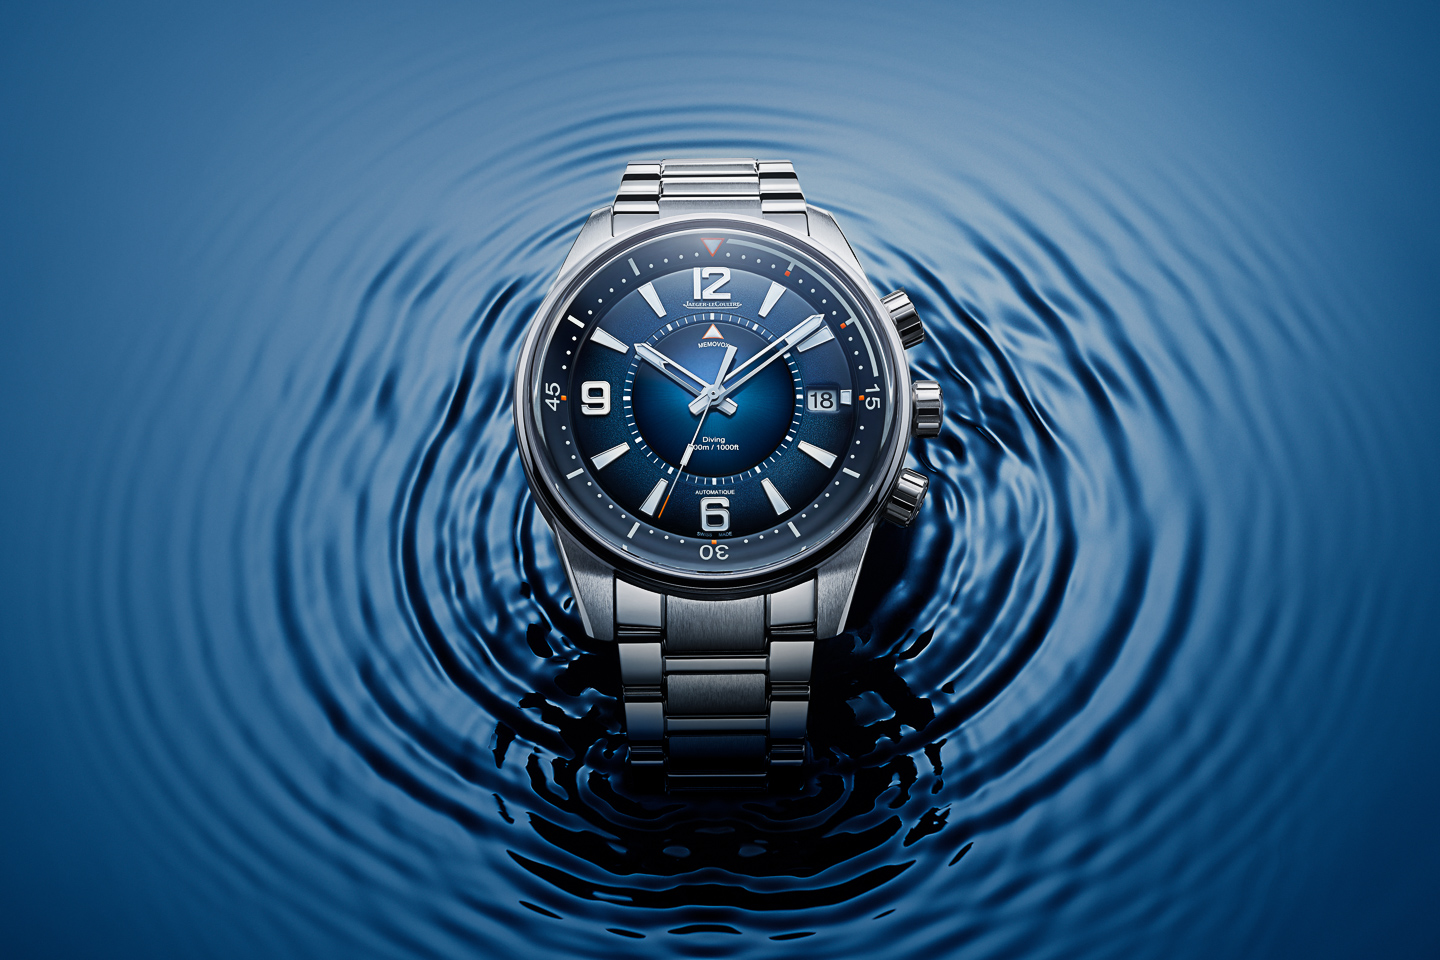 INTRODUCING: The Jaeger-LeCoultre Polaris Mariner Memovox is an alarmingly different type of Polaris